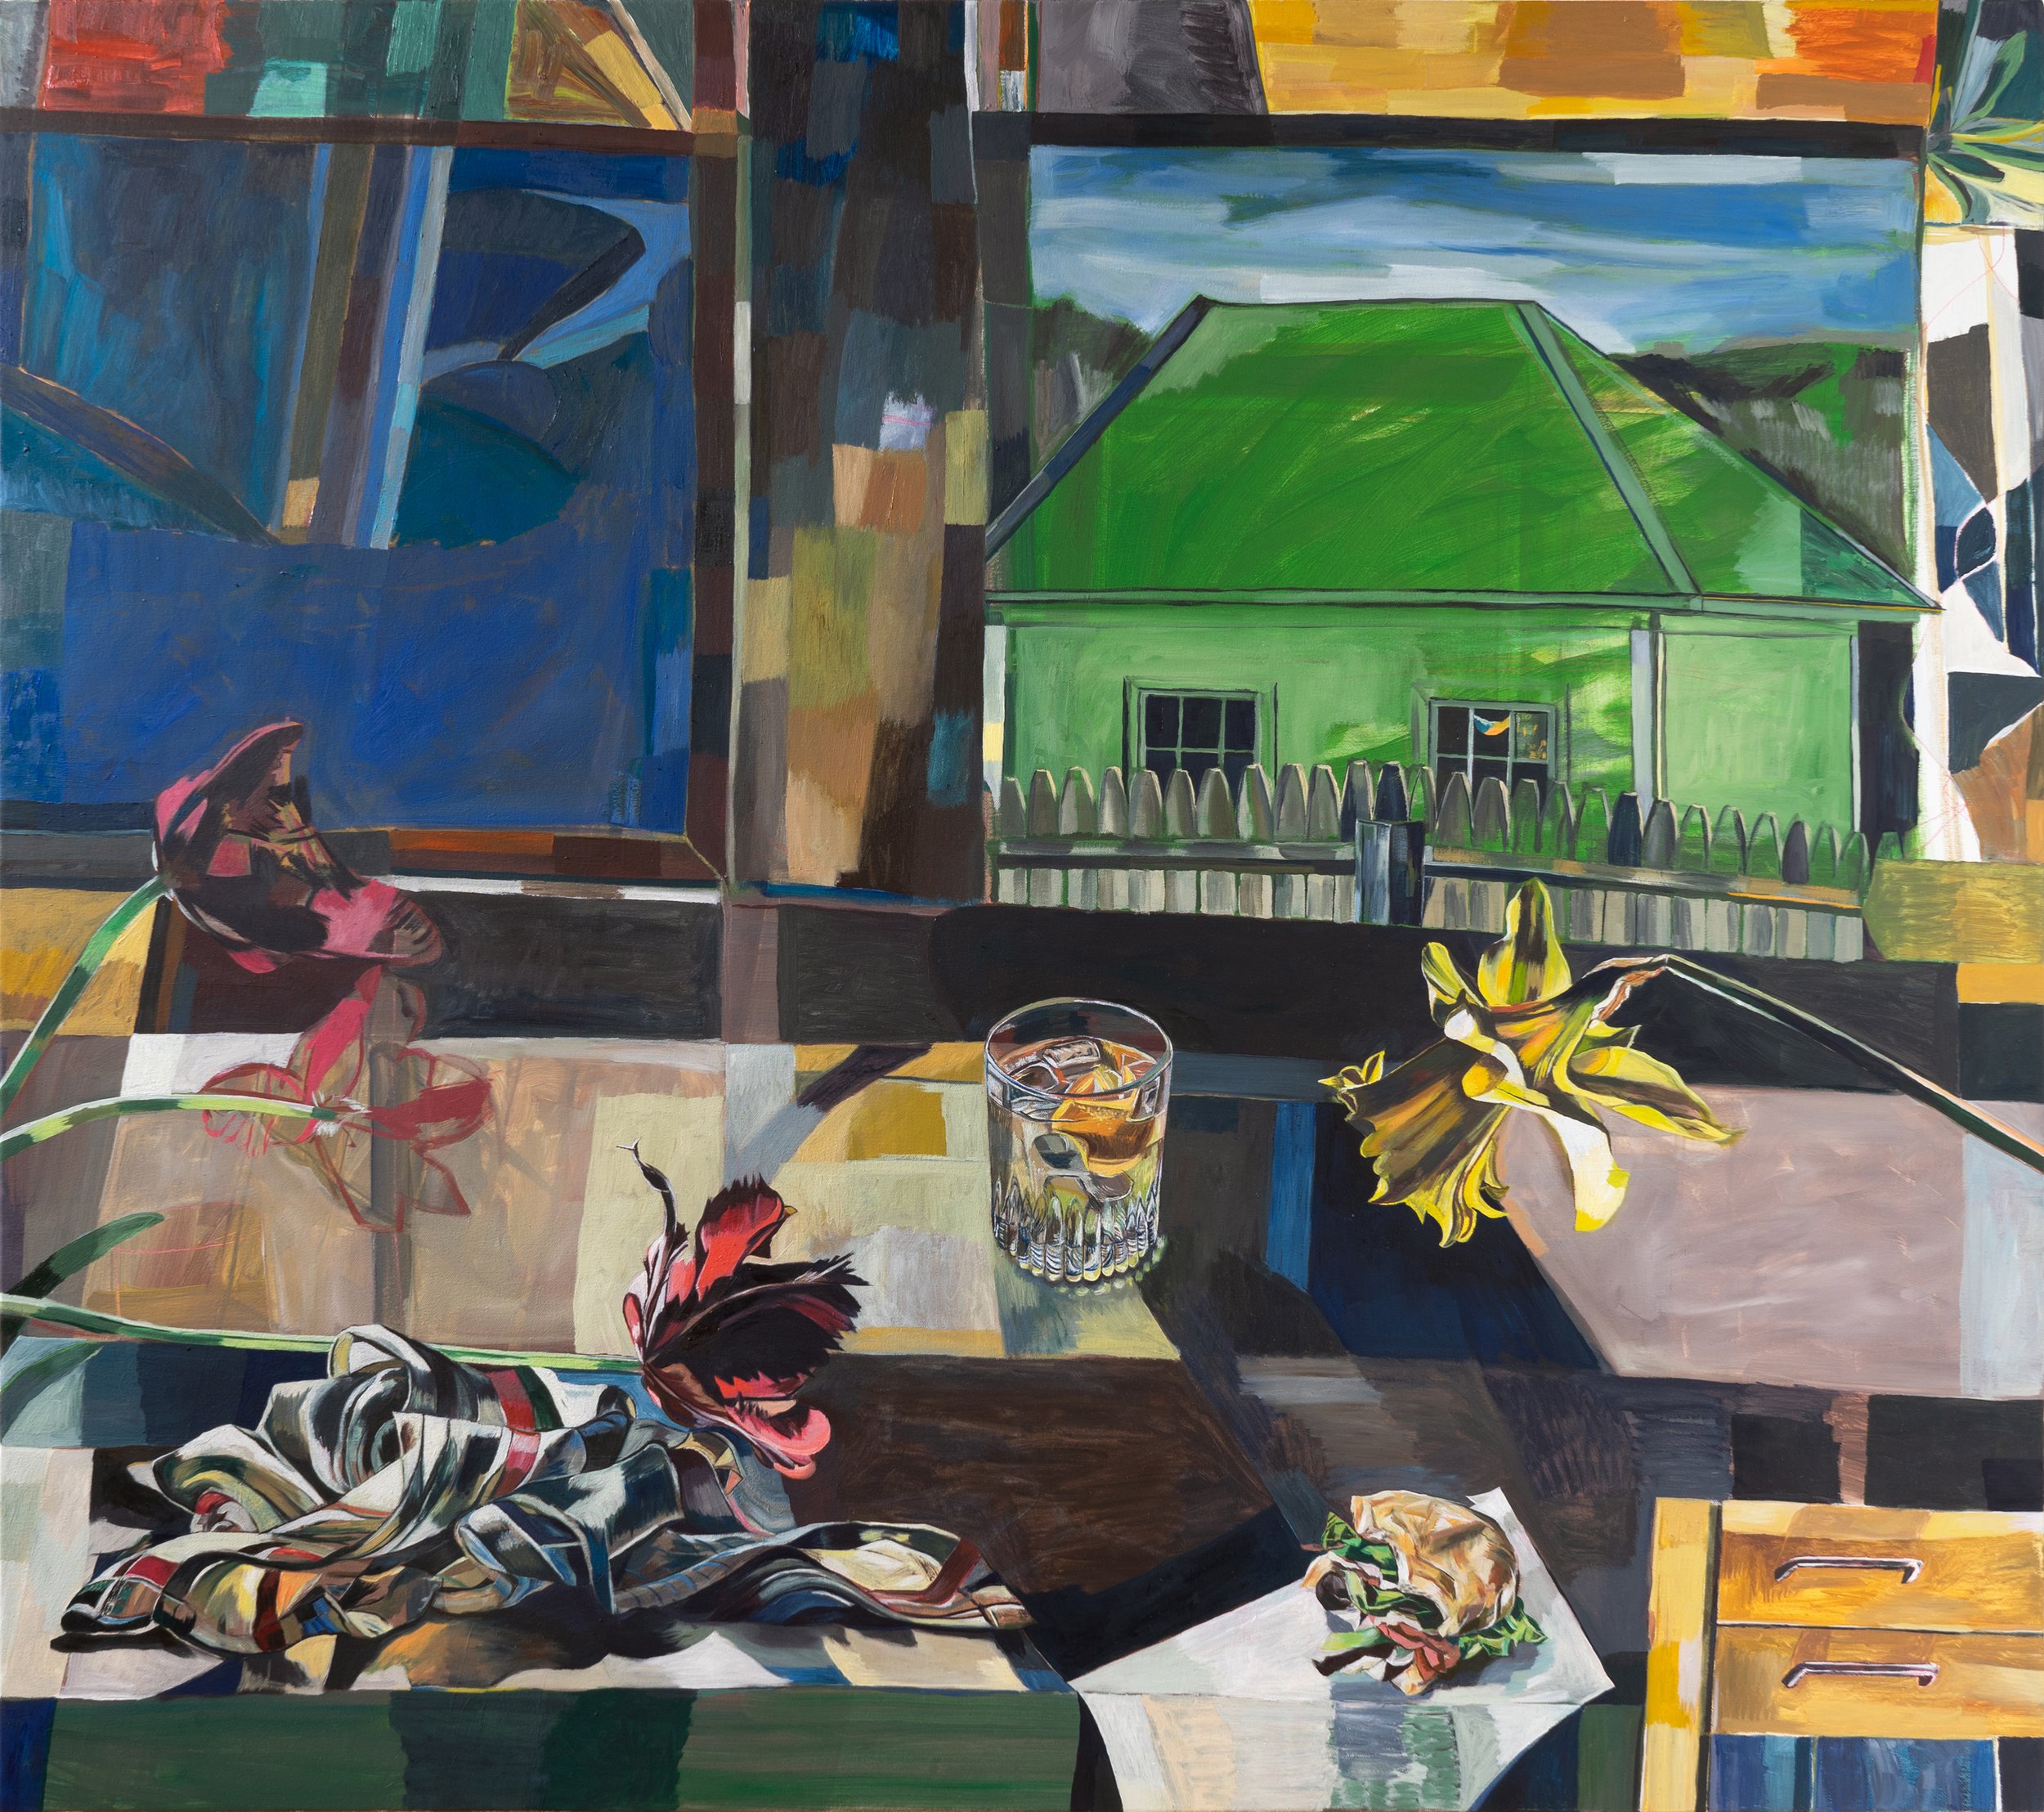   Jay Stern  United States, born 1991  Green House and Table , 2023  oil on canvas, 40 x 45 inches  Courtesy the artist  © Jay Stern  Image courtesy the artist 